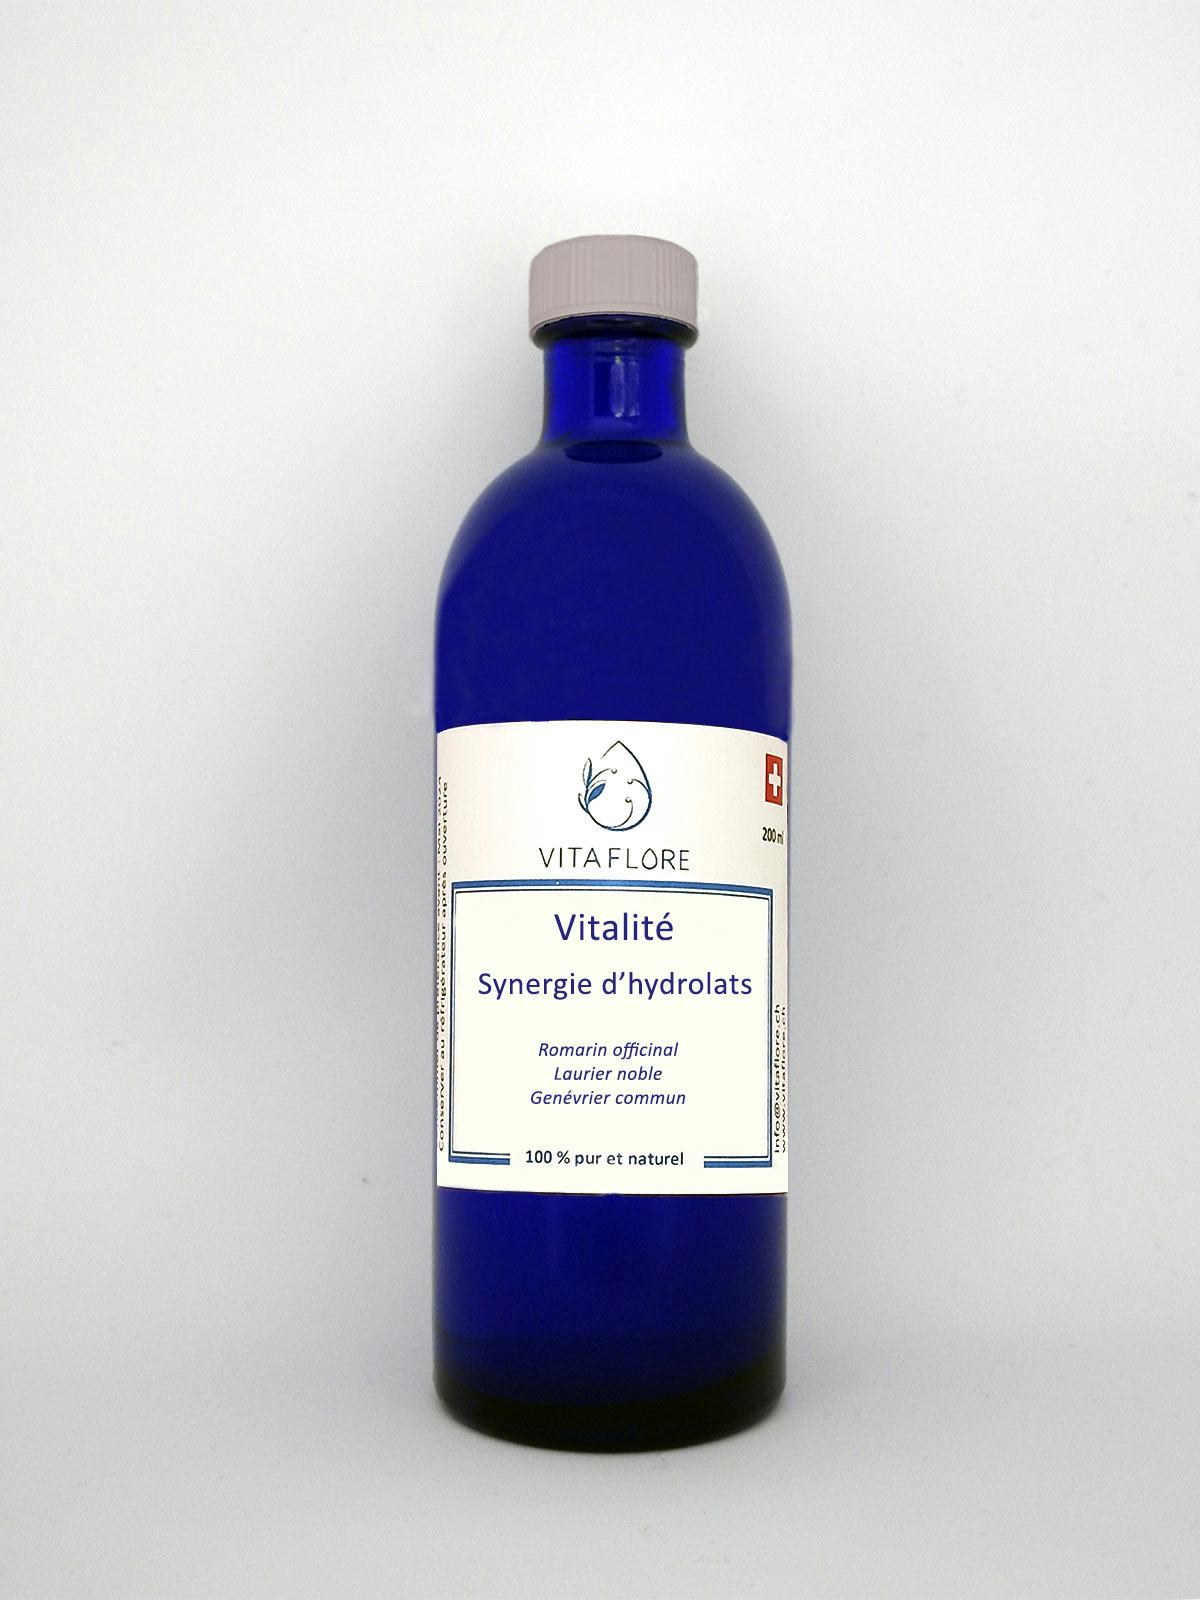 Synergie d’hydrolats – Vitalité, artisanal product for direct sale in Switzerland